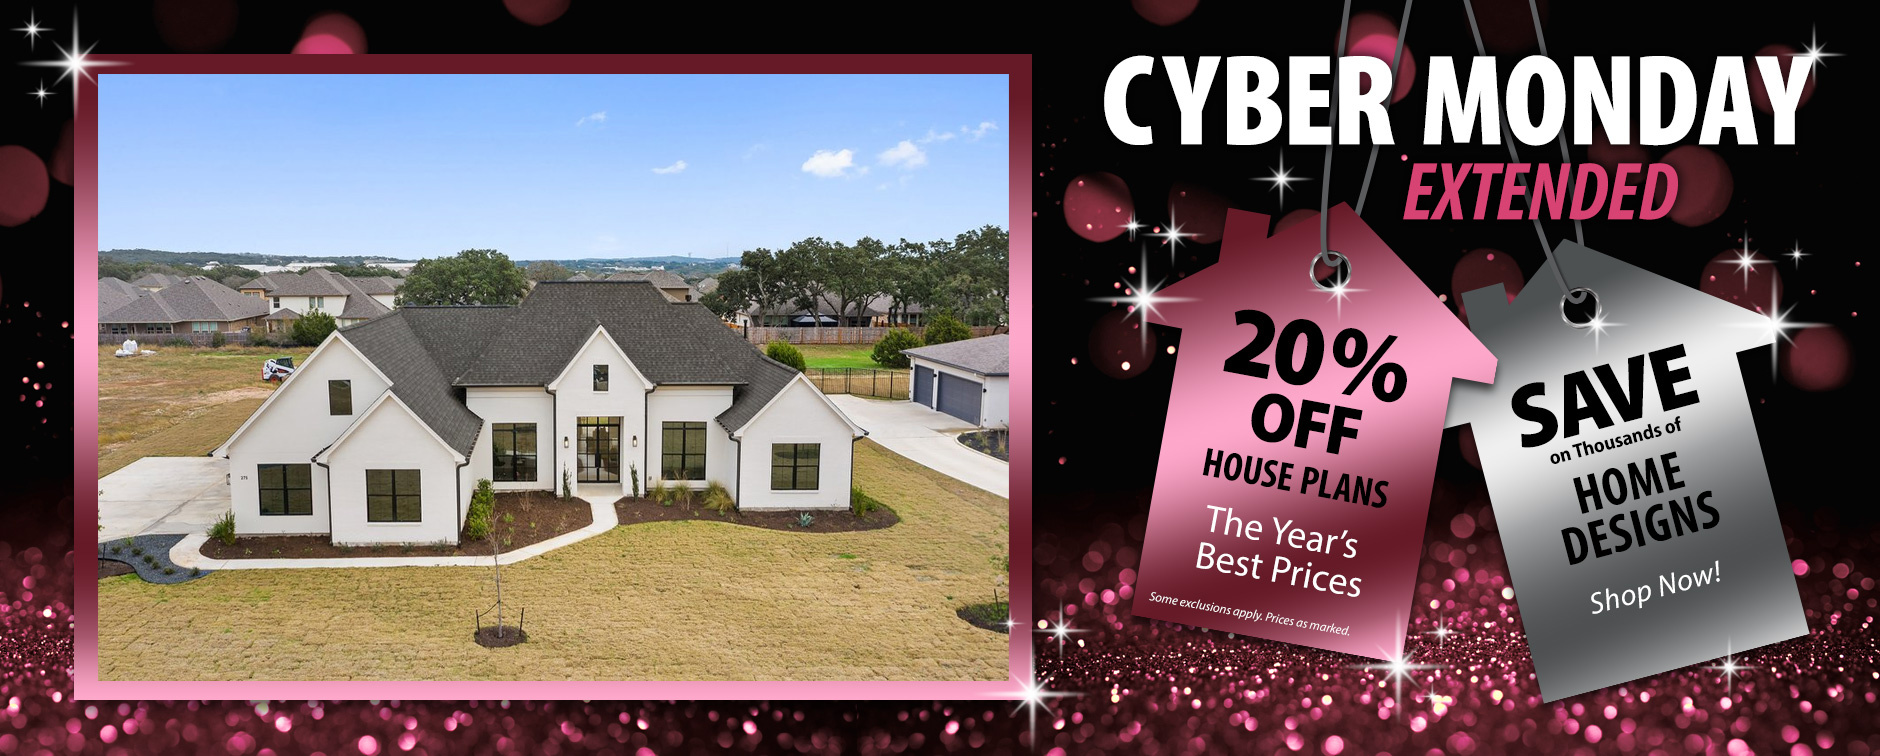 Cyber Monday Sale Extended: Save 20% on Home Plans